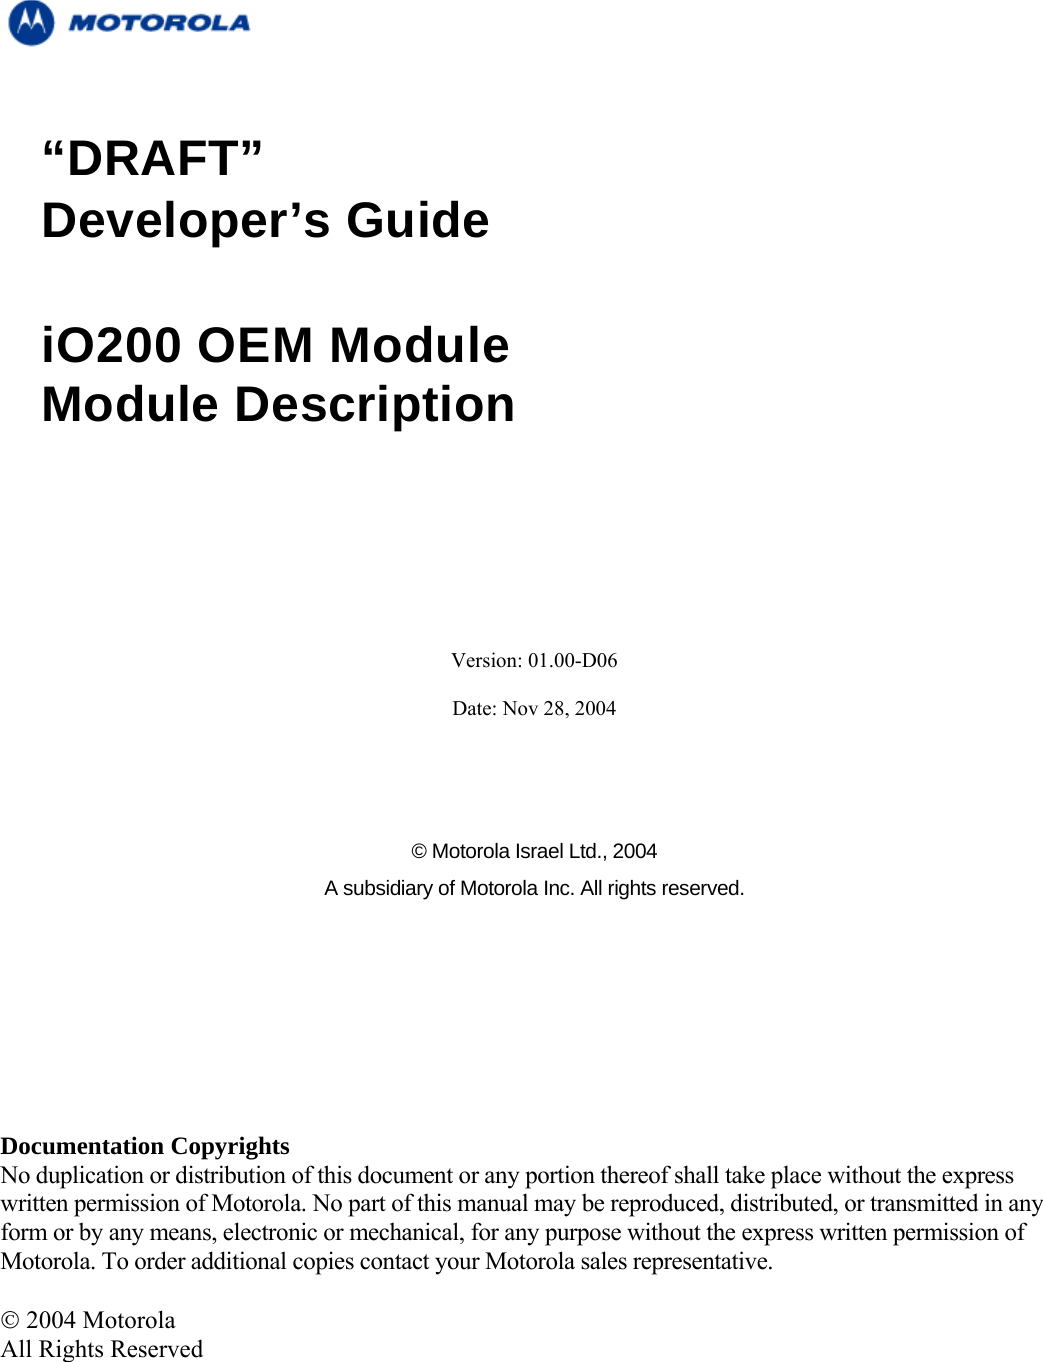   “DRAFT” Developer’s Guide                          iO200 OEM Module Module Description      Version: 01.00-D06  Date: Nov 28, 2004      © Motorola Israel Ltd., 2004 A subsidiary of Motorola Inc. All rights reserved.       Documentation Copyrights No duplication or distribution of this document or any portion thereof shall take place without the express written permission of Motorola. No part of this manual may be reproduced, distributed, or transmitted in any form or by any means, electronic or mechanical, for any purpose without the express written permission of Motorola. To order additional copies contact your Motorola sales representative.  © 2004 Motorola All Rights Reserved     